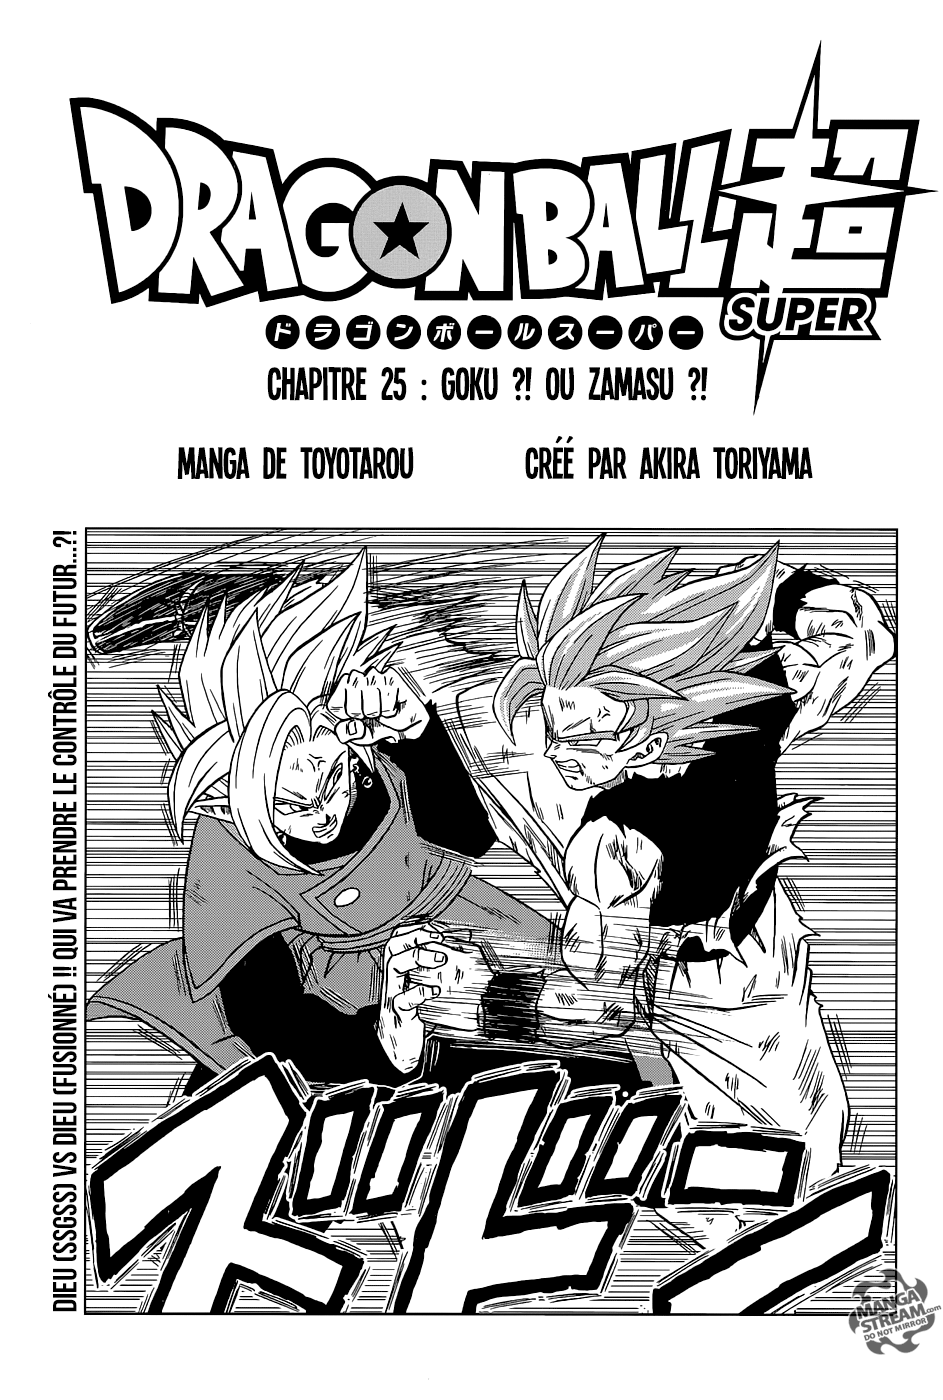 Dragon Ball Super: Chapter chapitre-25 - Page 1